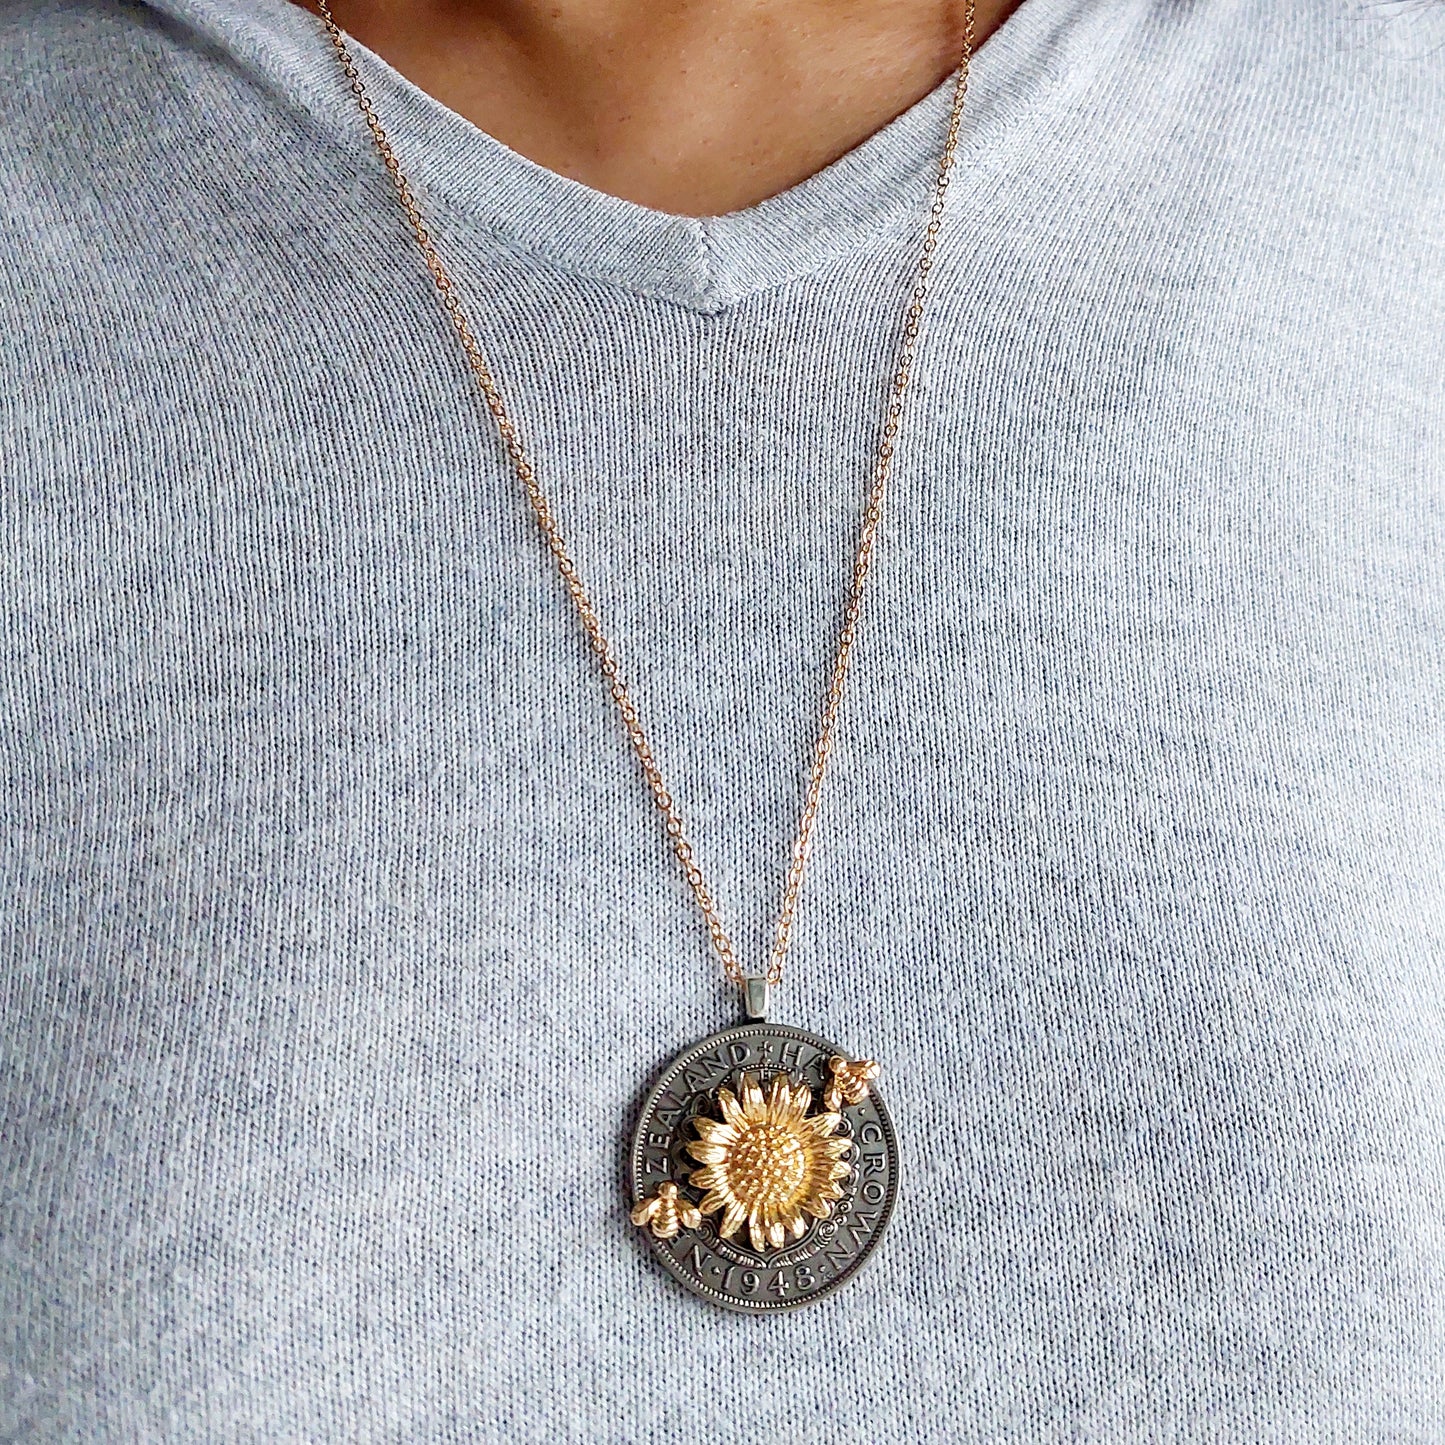 NEW!! Re-minted Half Crown Pendant with Golden Sunflower and Bees